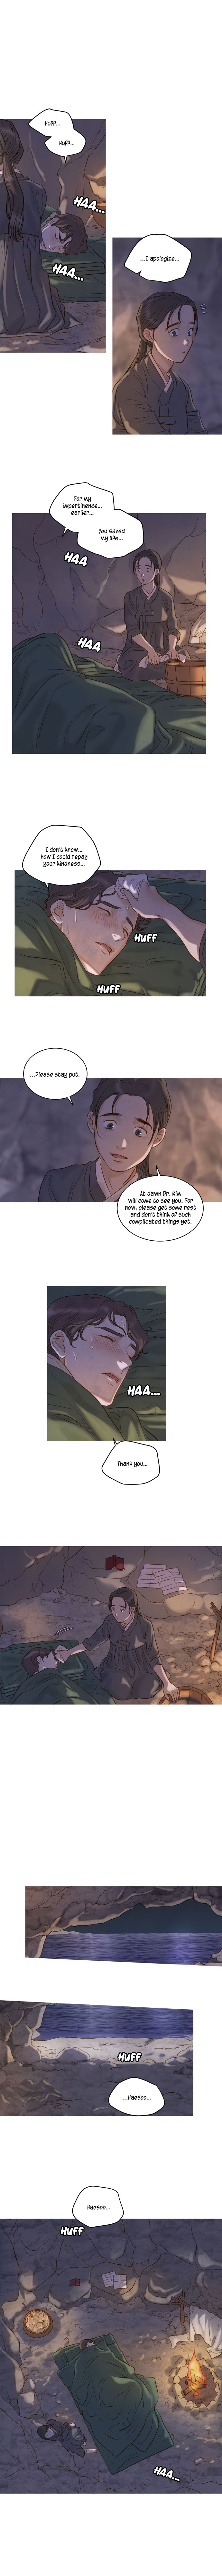 The Whale Star - The Gyeongseong Mermaid - Chapter 3 Page 4